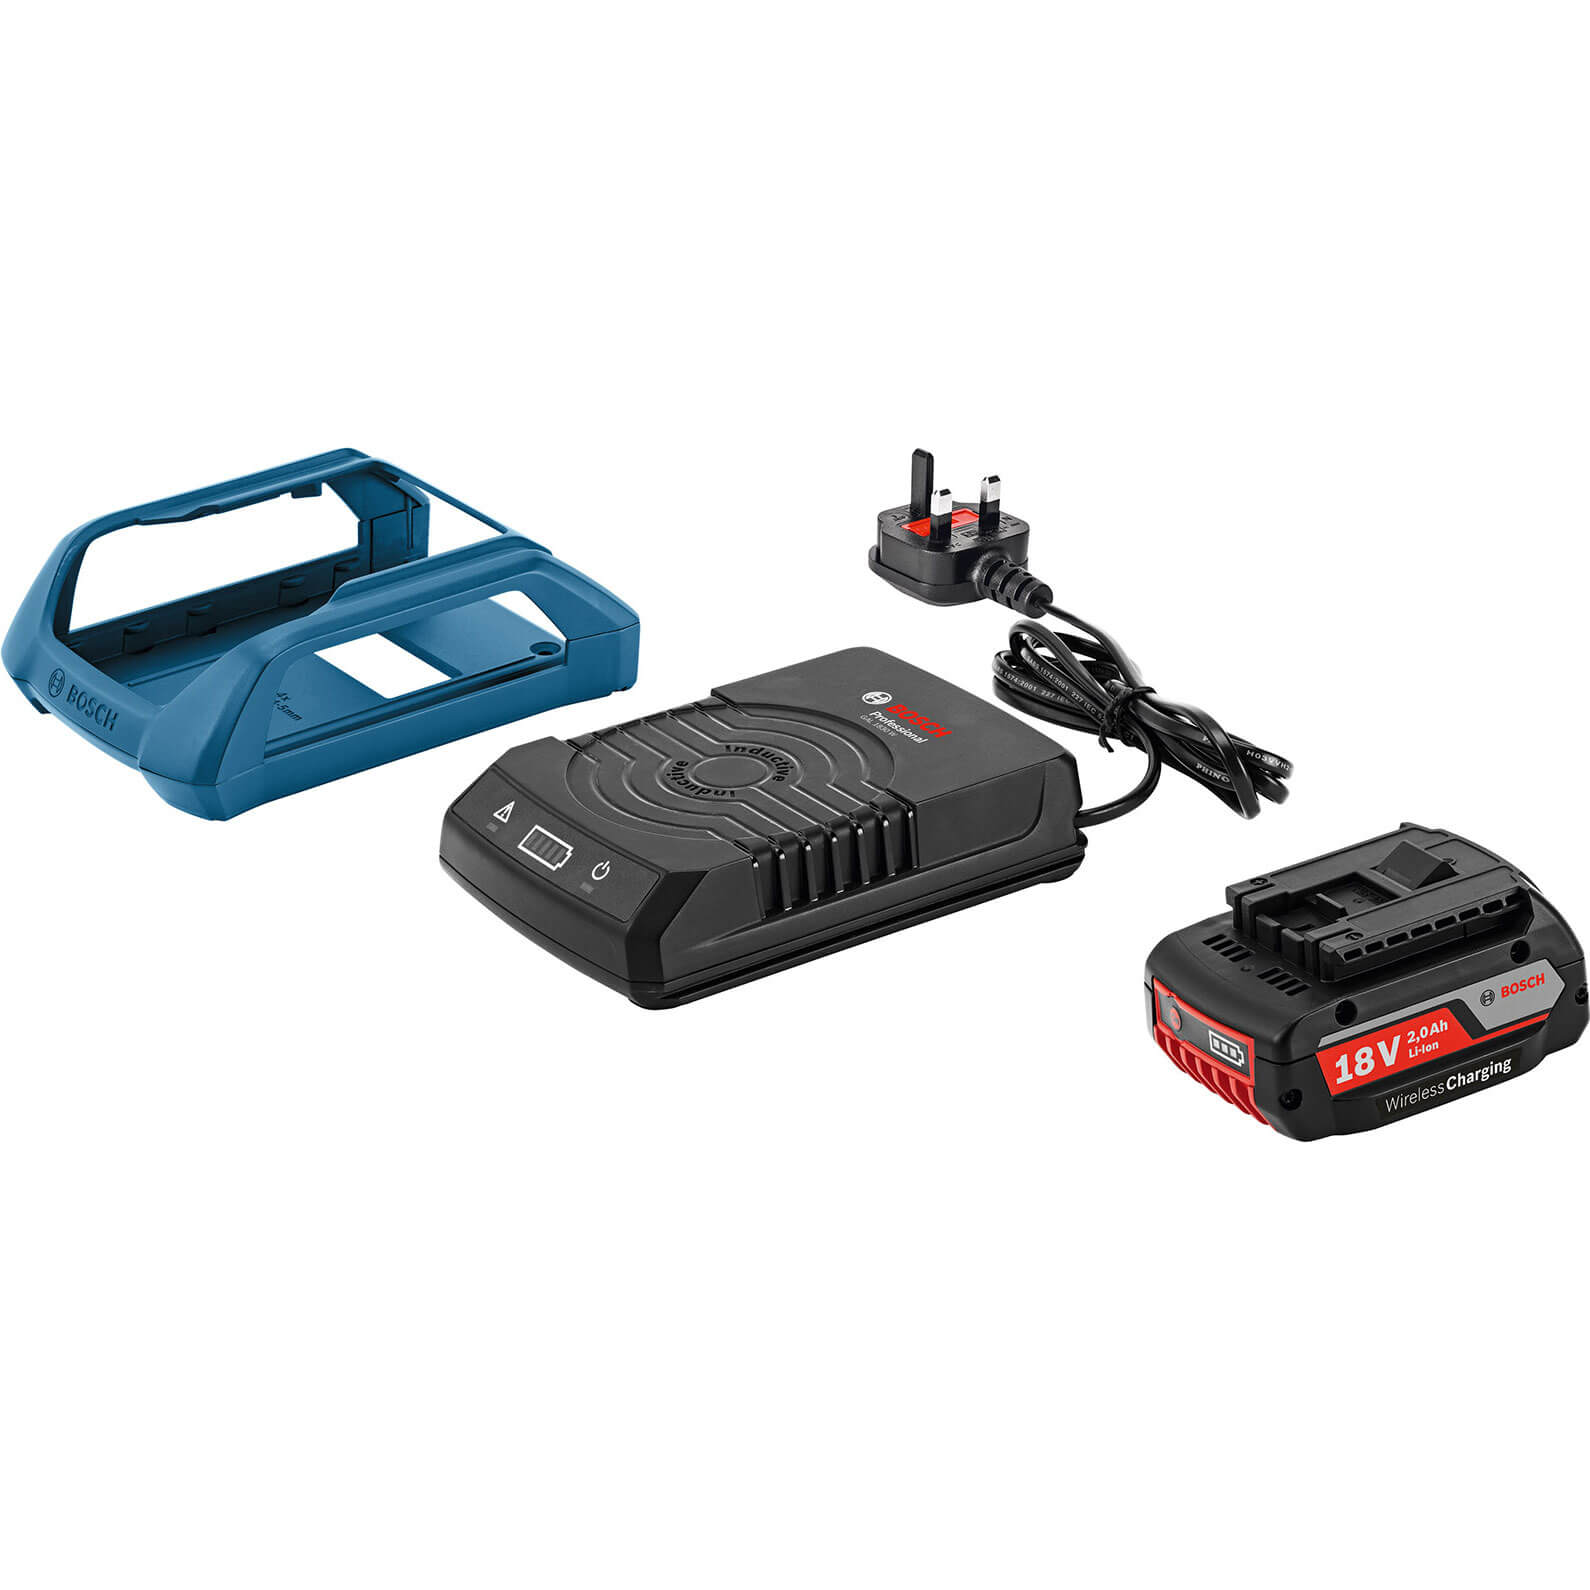 Image of Bosch 18v Cordless Wireless Charging Lithium Ion Battery & Charger